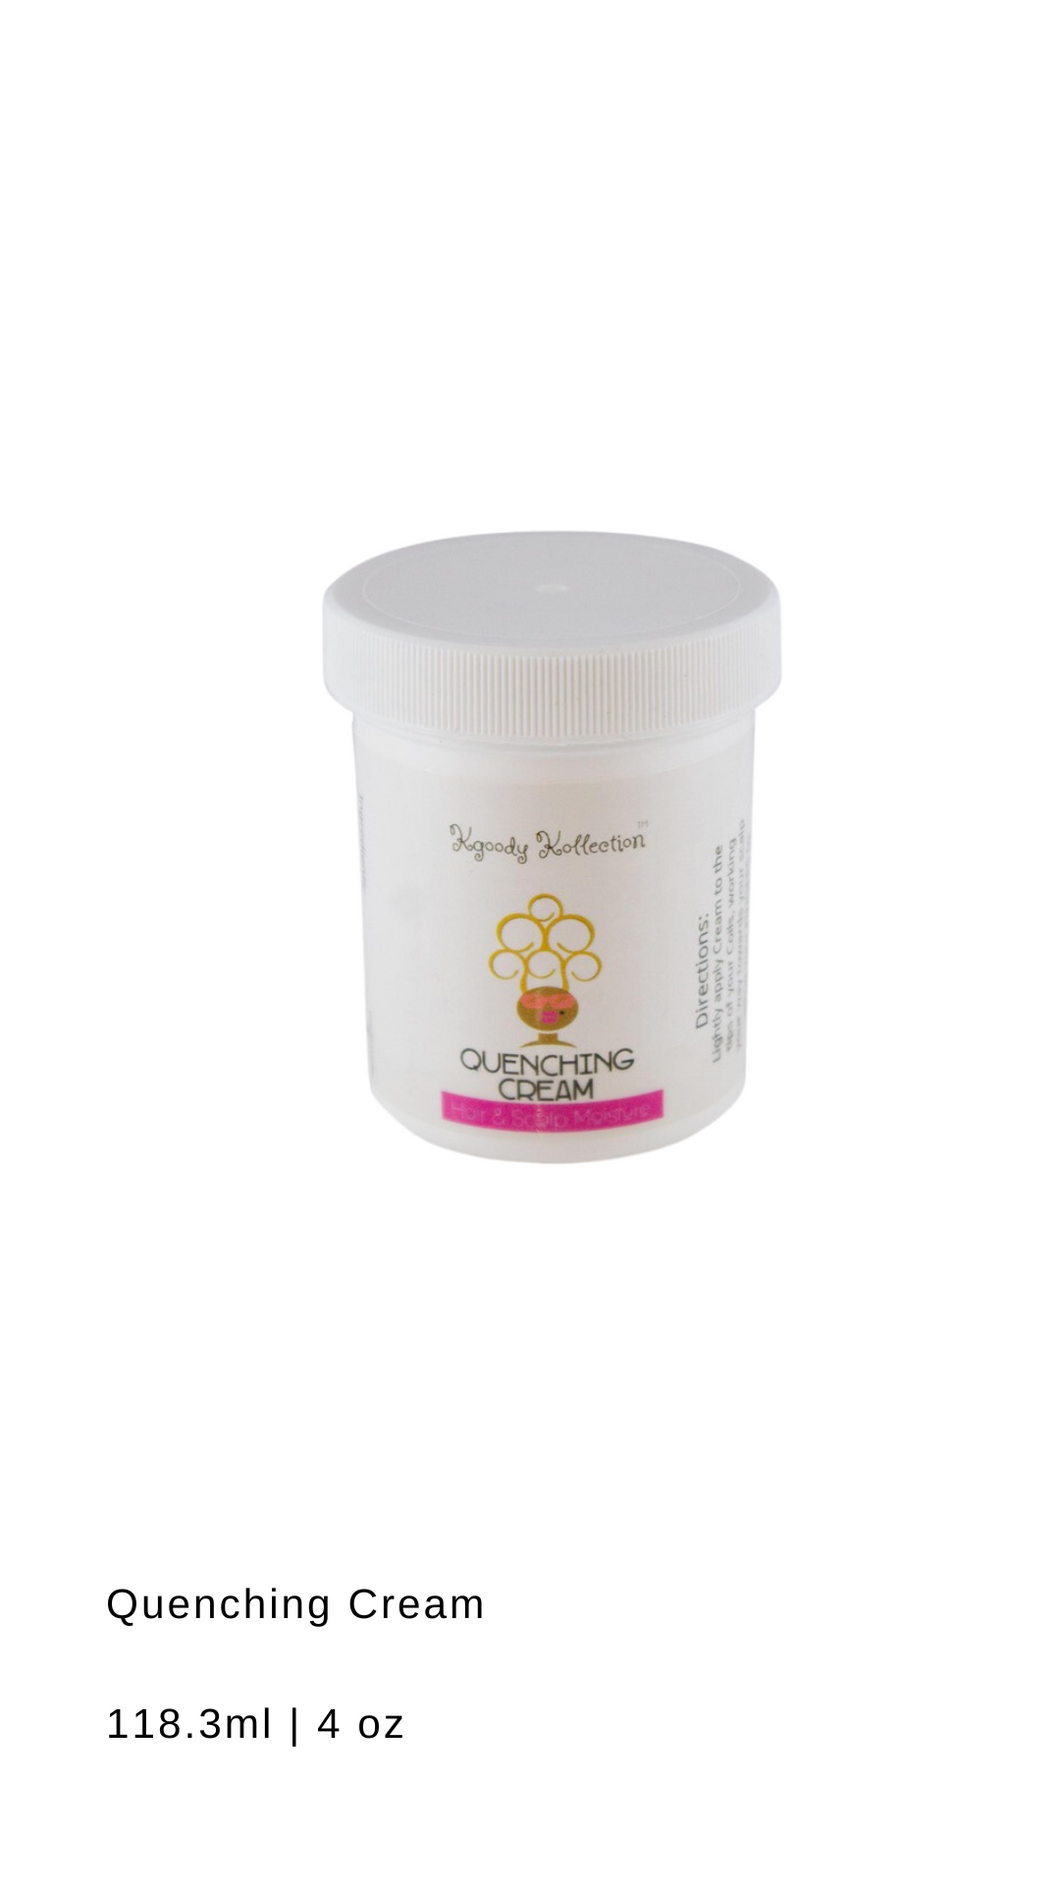 Kgoody Kollection™ Quenching Cream